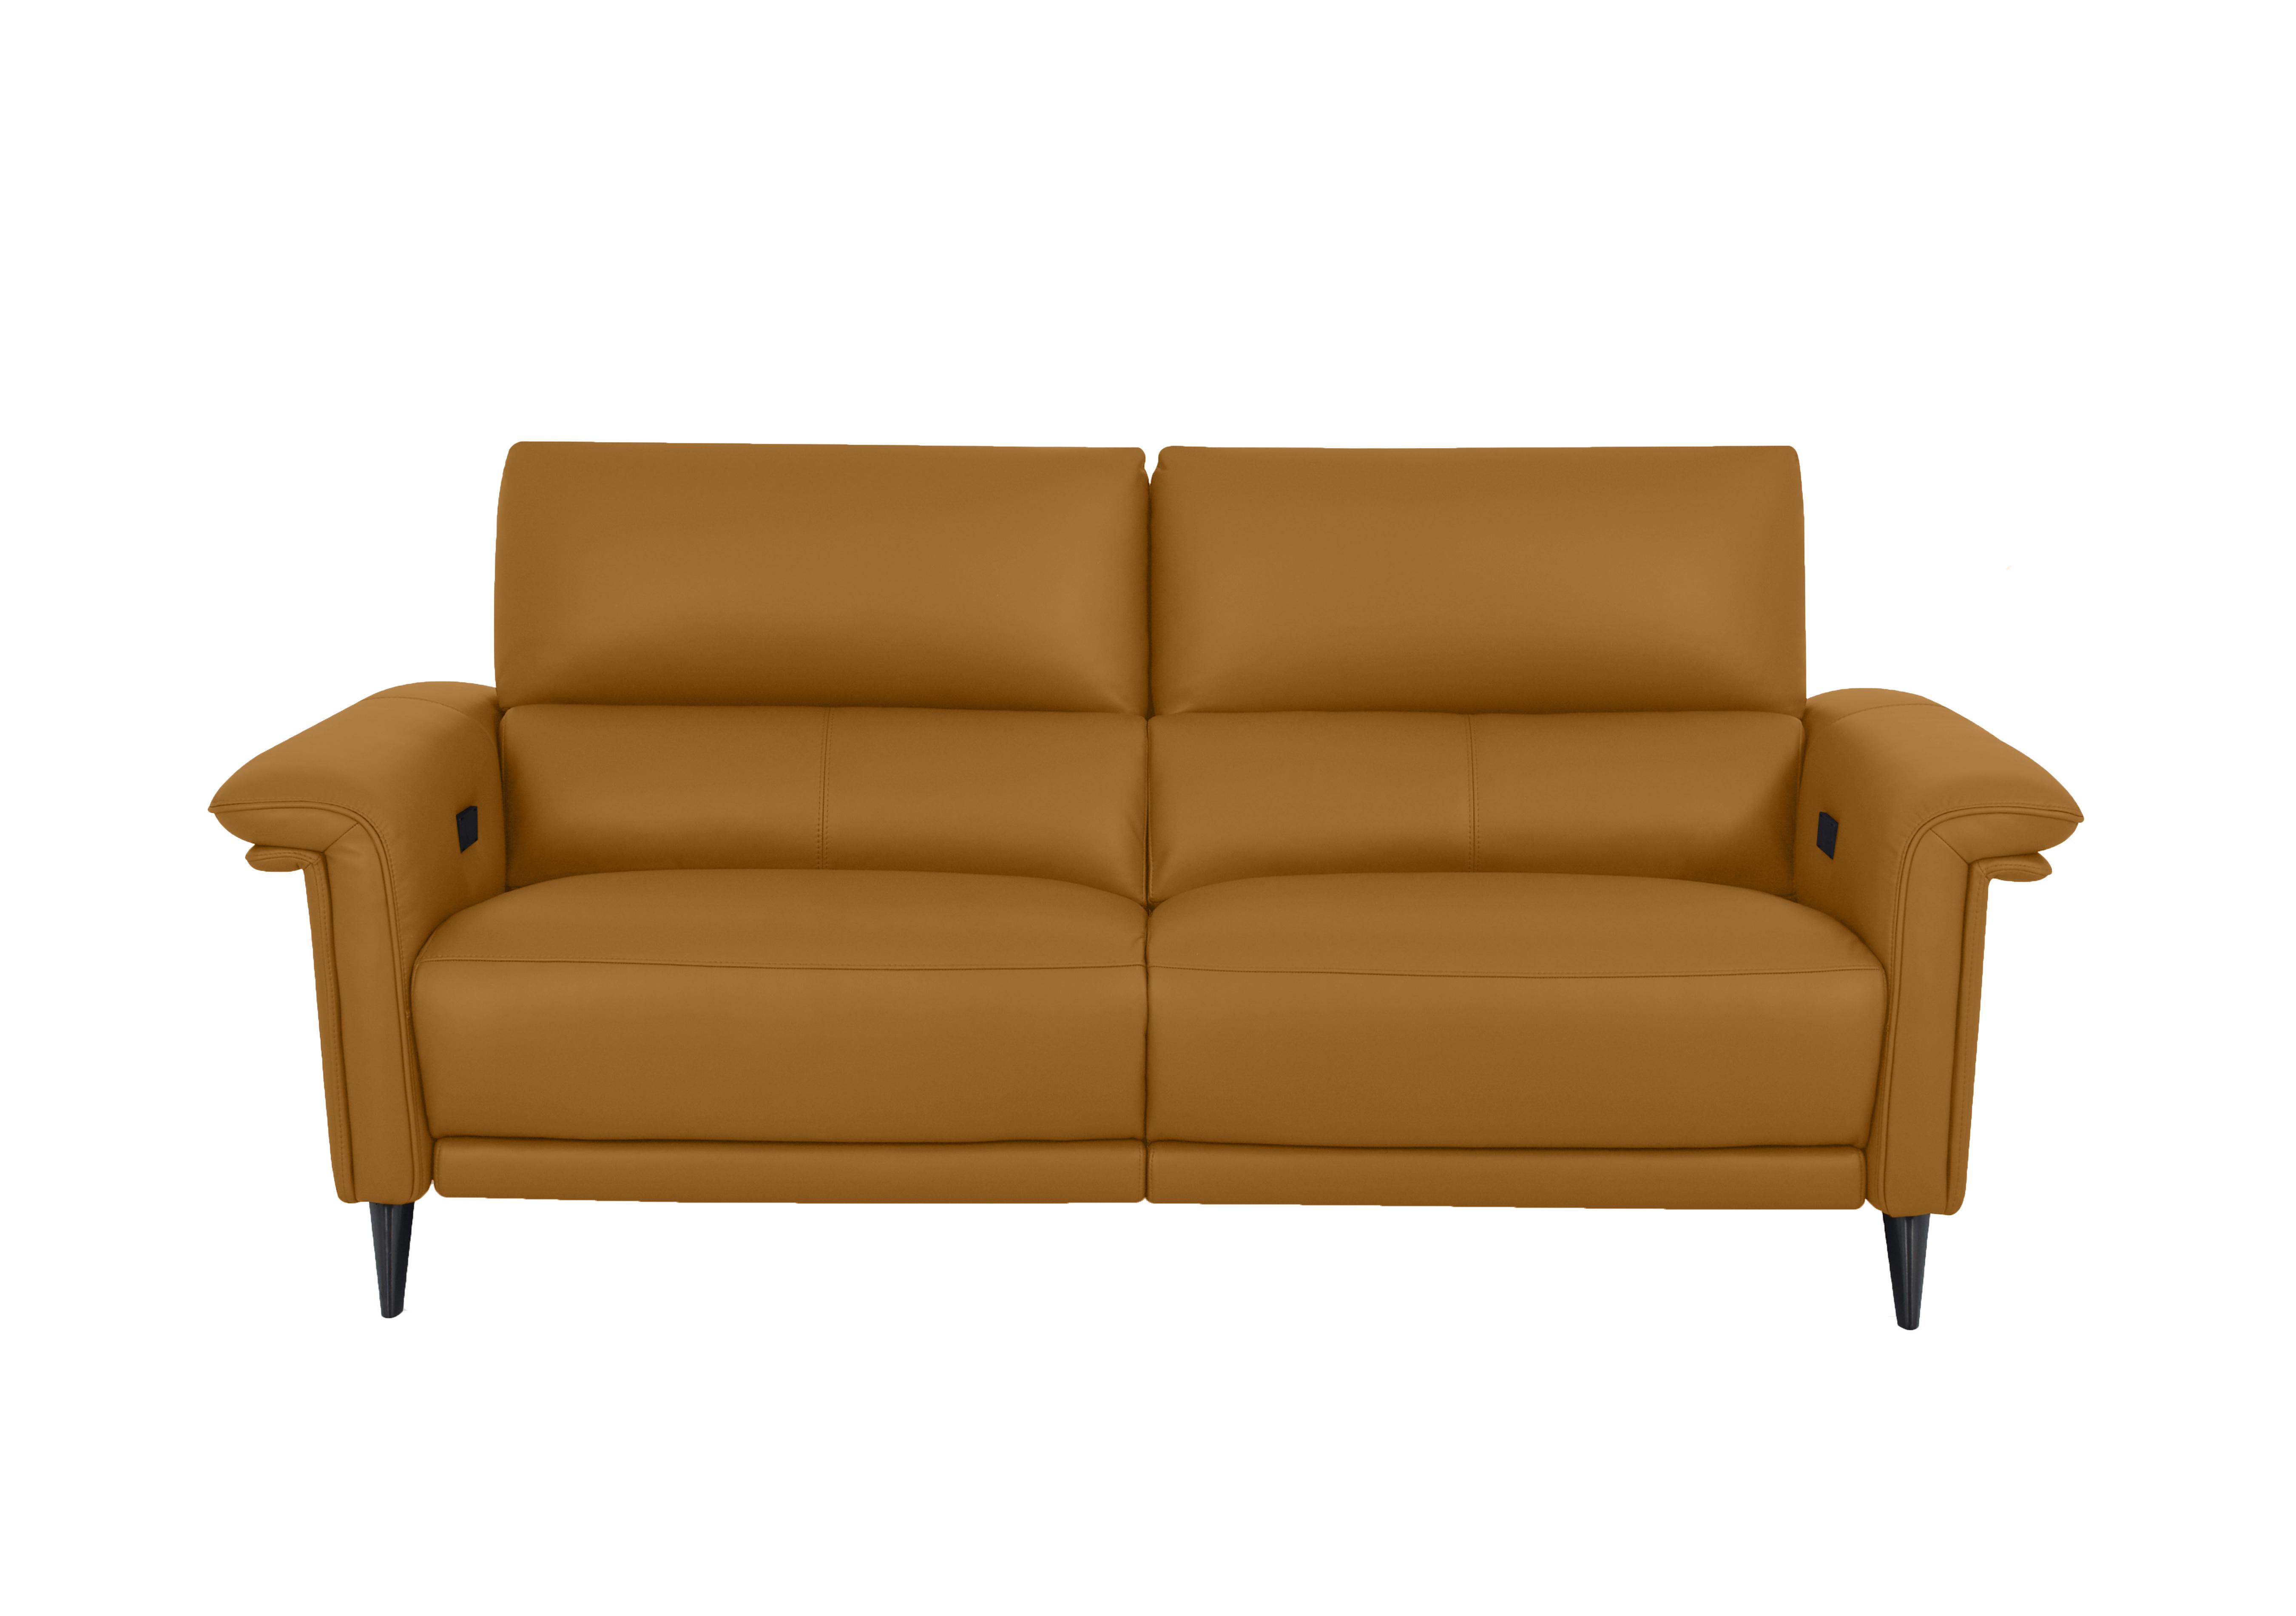 Huxley 3 Seater Leather Sofa in Np-606e Honey Yellow on Furniture Village